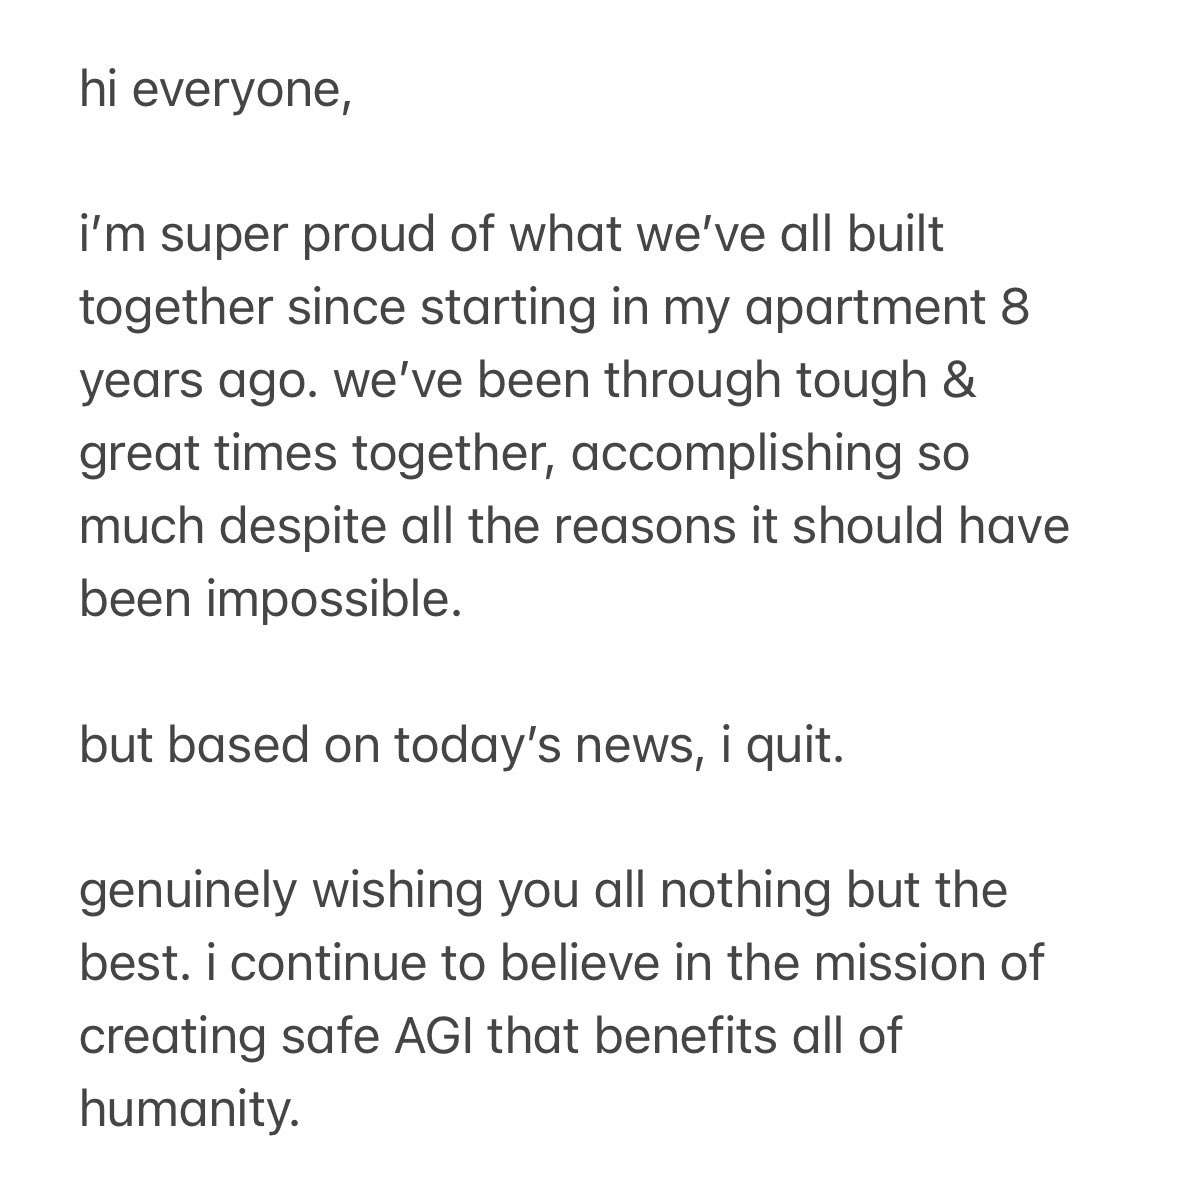 After learning today’s news, this is the message I sent to the OpenAI team: